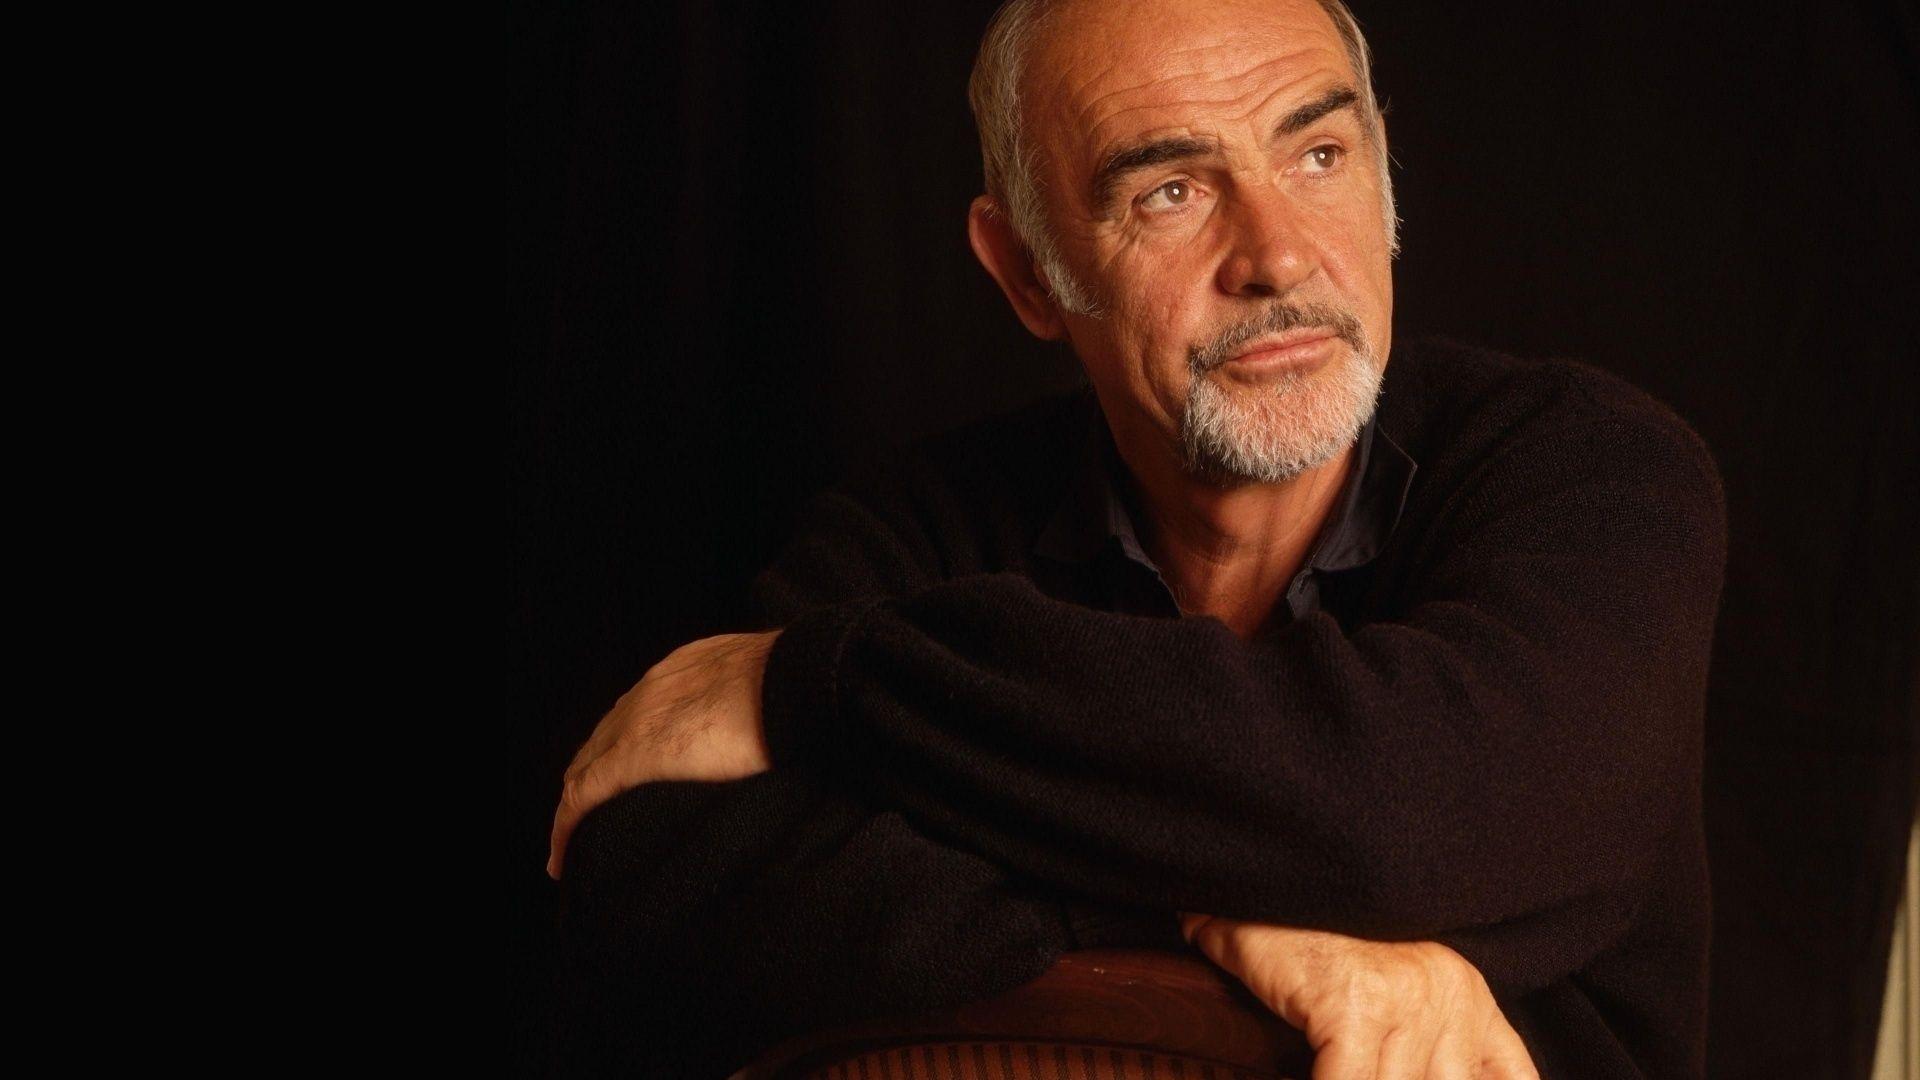 Download Wallpaper 1920x1080 Sean connery, Man, Actor, Producer